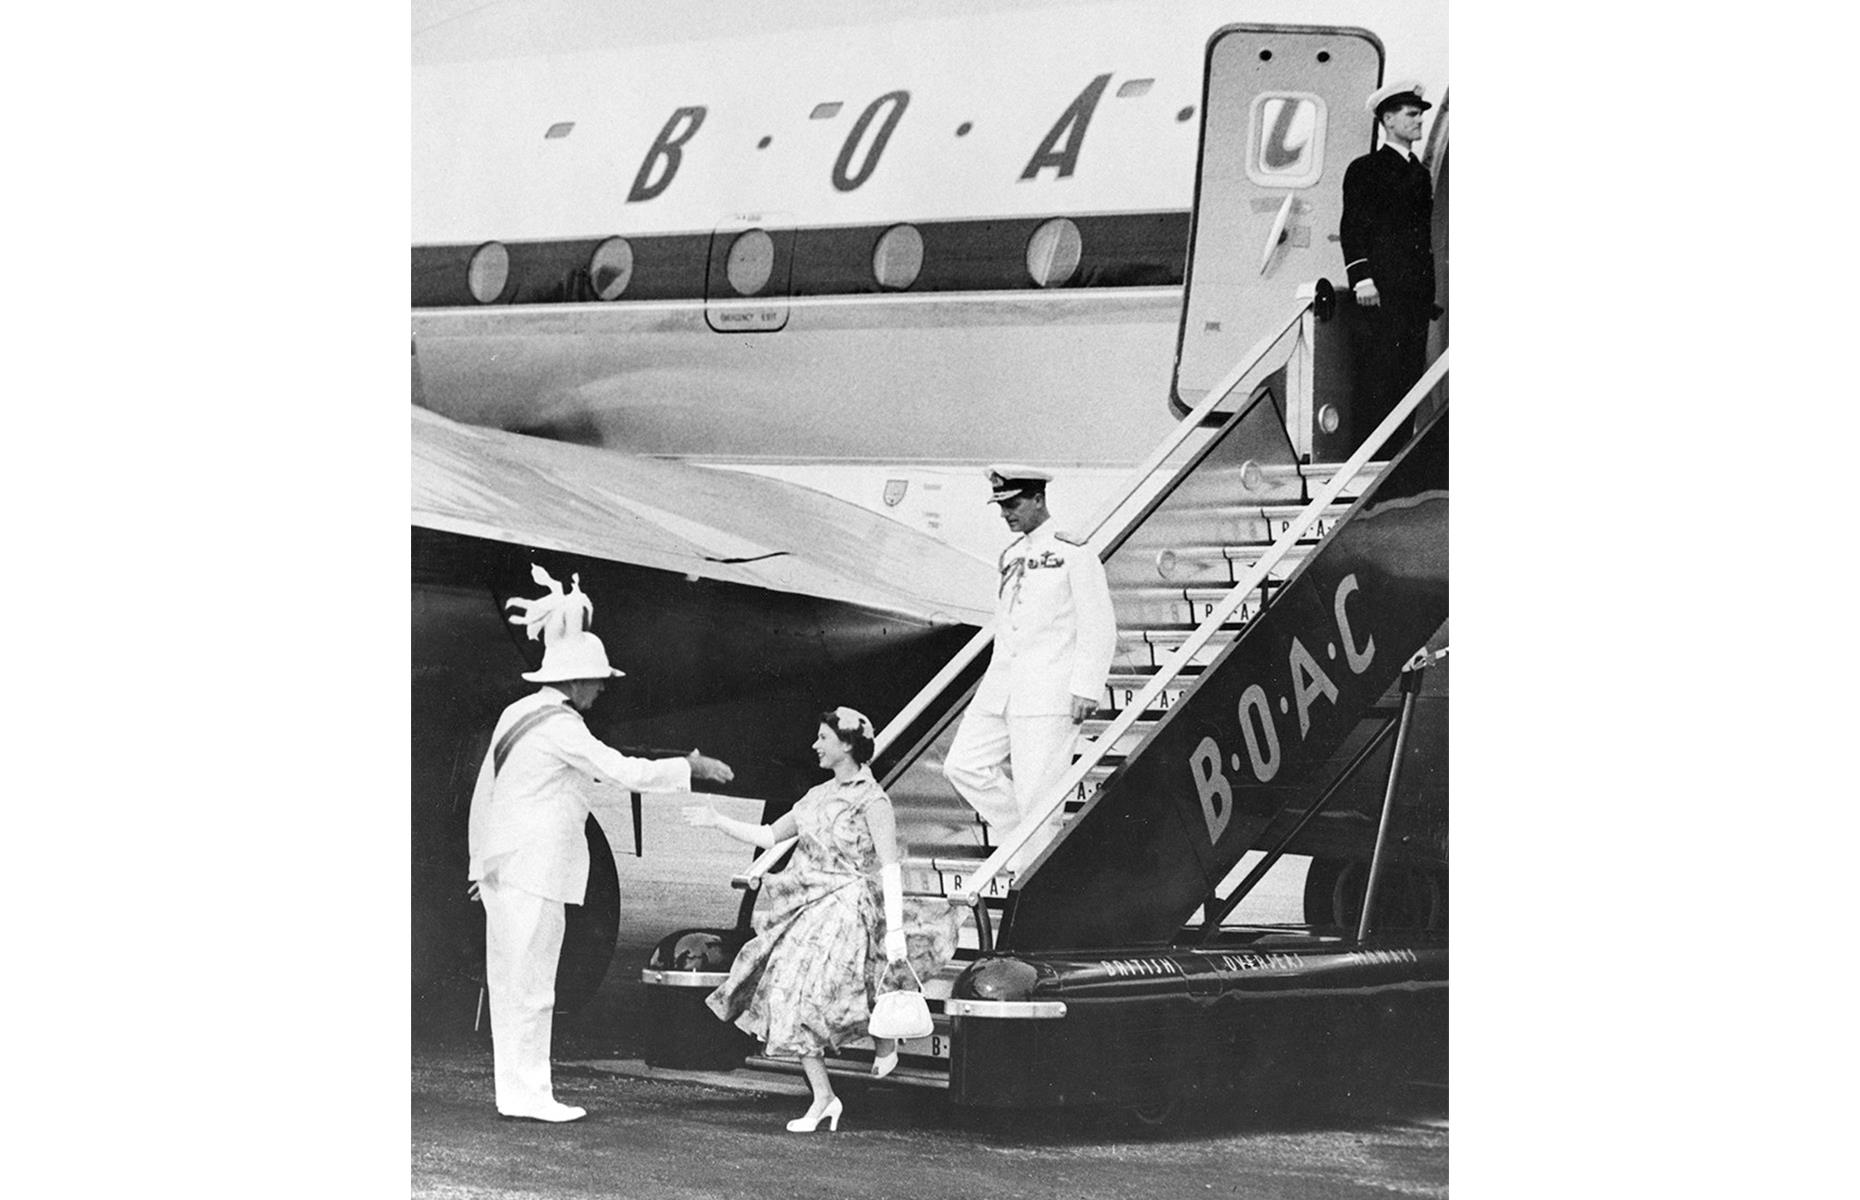 Though commercial aviation was developing at an alarming rate, it hadn't quite opened up to the masses yet. In this decade, plane tickets were still very expensive, so air travel was the domain of the wealthy and elite. Fit for royalty, this BOAC flight landed Her Majesty the Queen safely in Bermuda in 1953: she visited the country just months after her coronation.